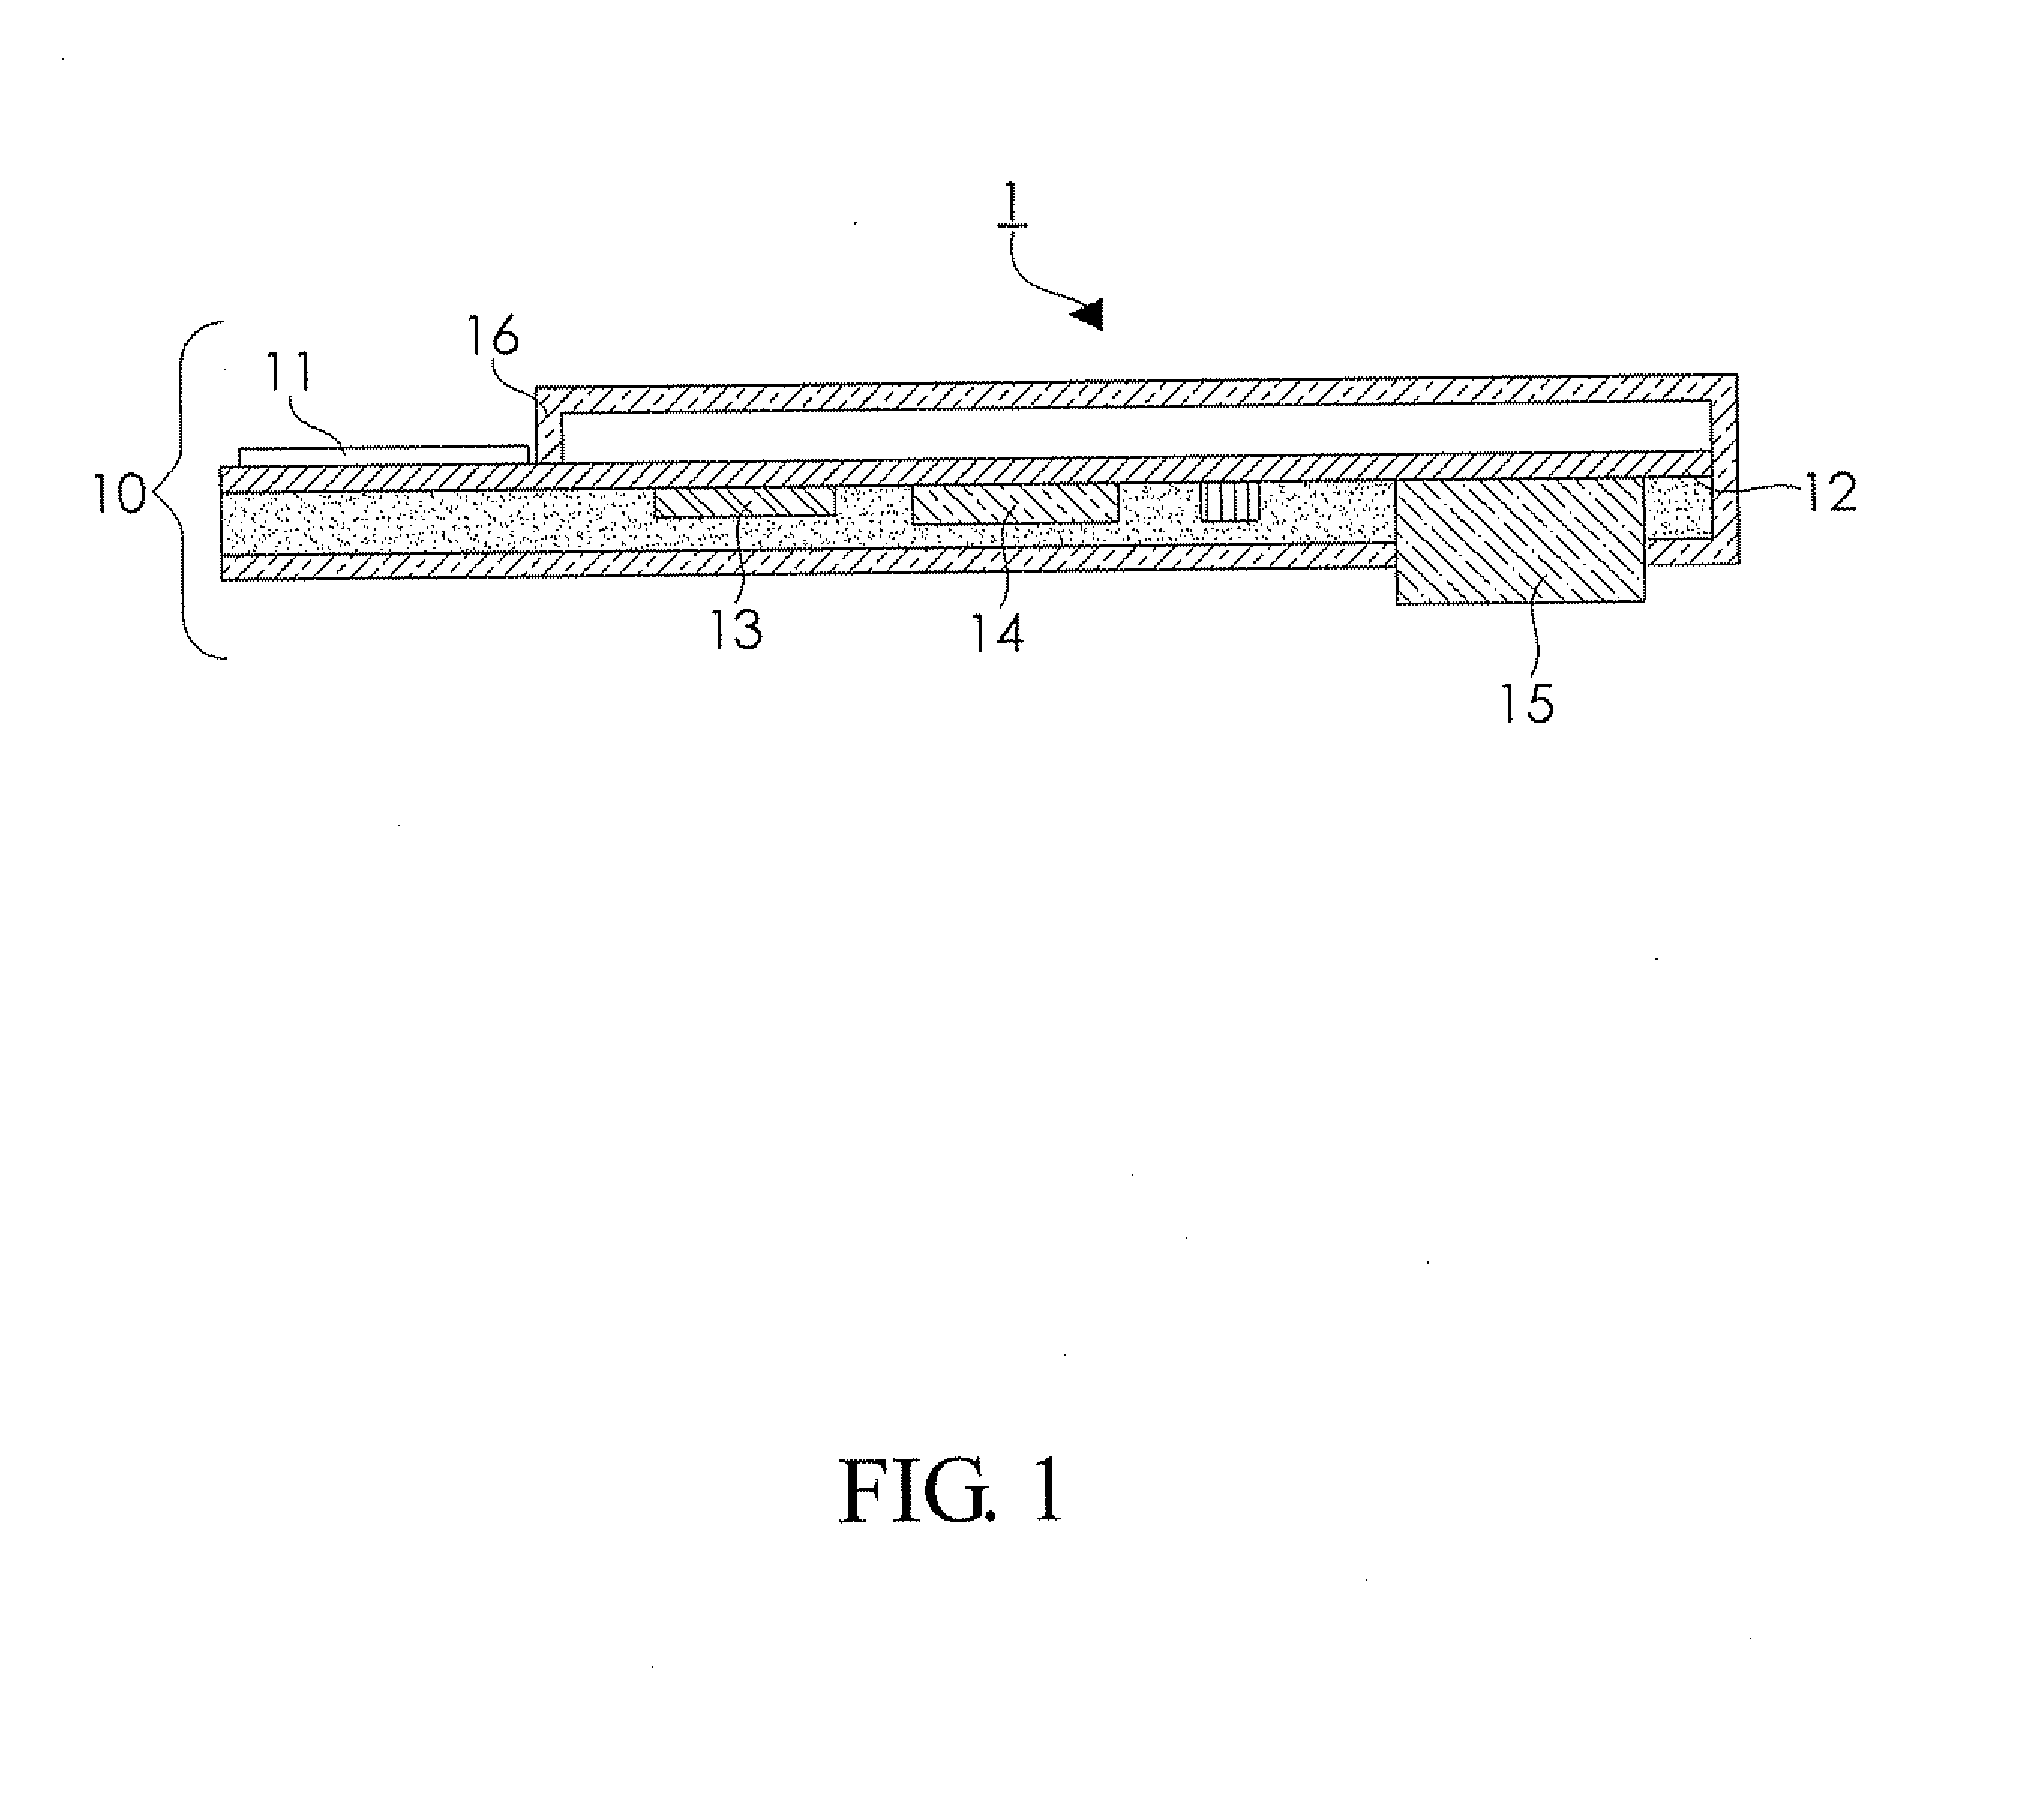 Storage device with a communications function